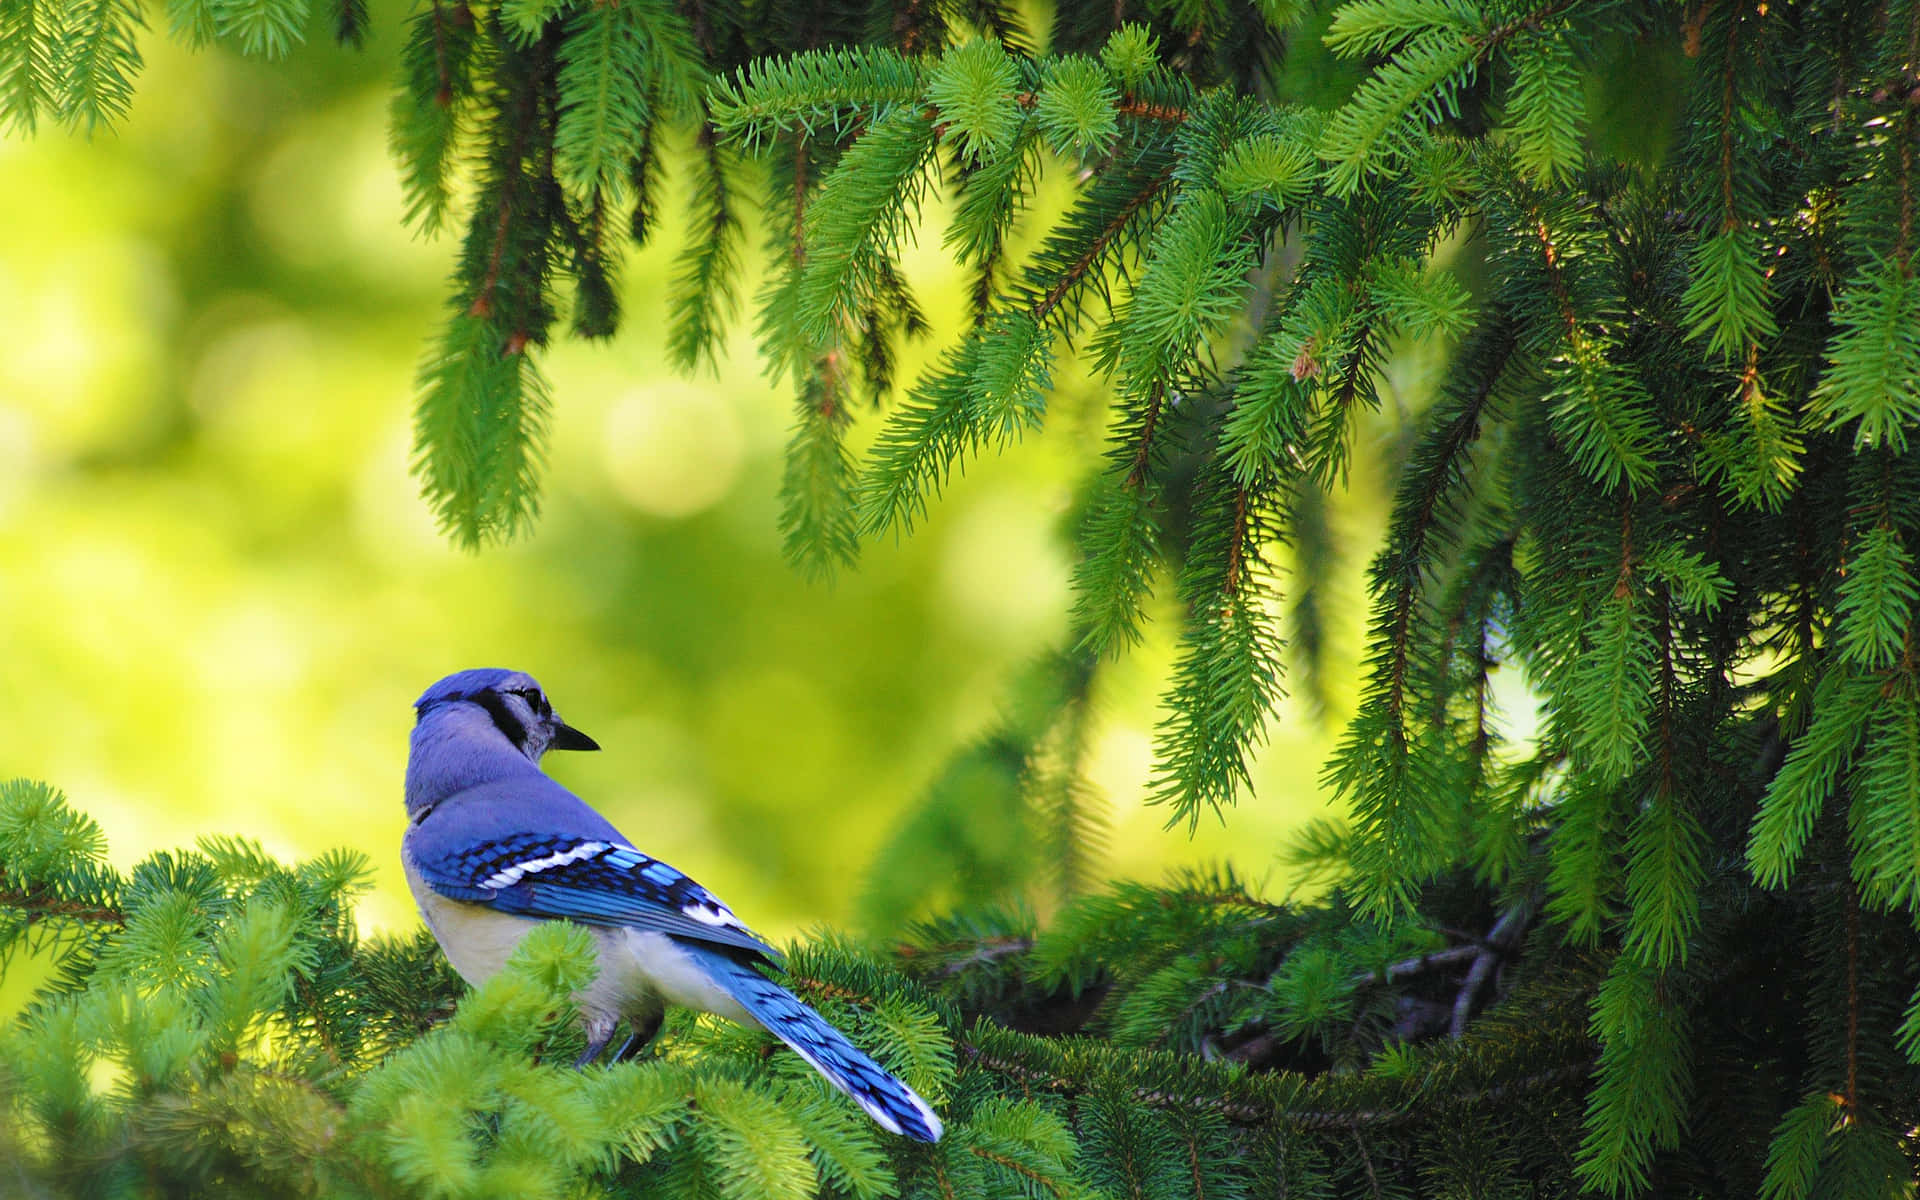 An inquisitive Blue Jay perched on a branch